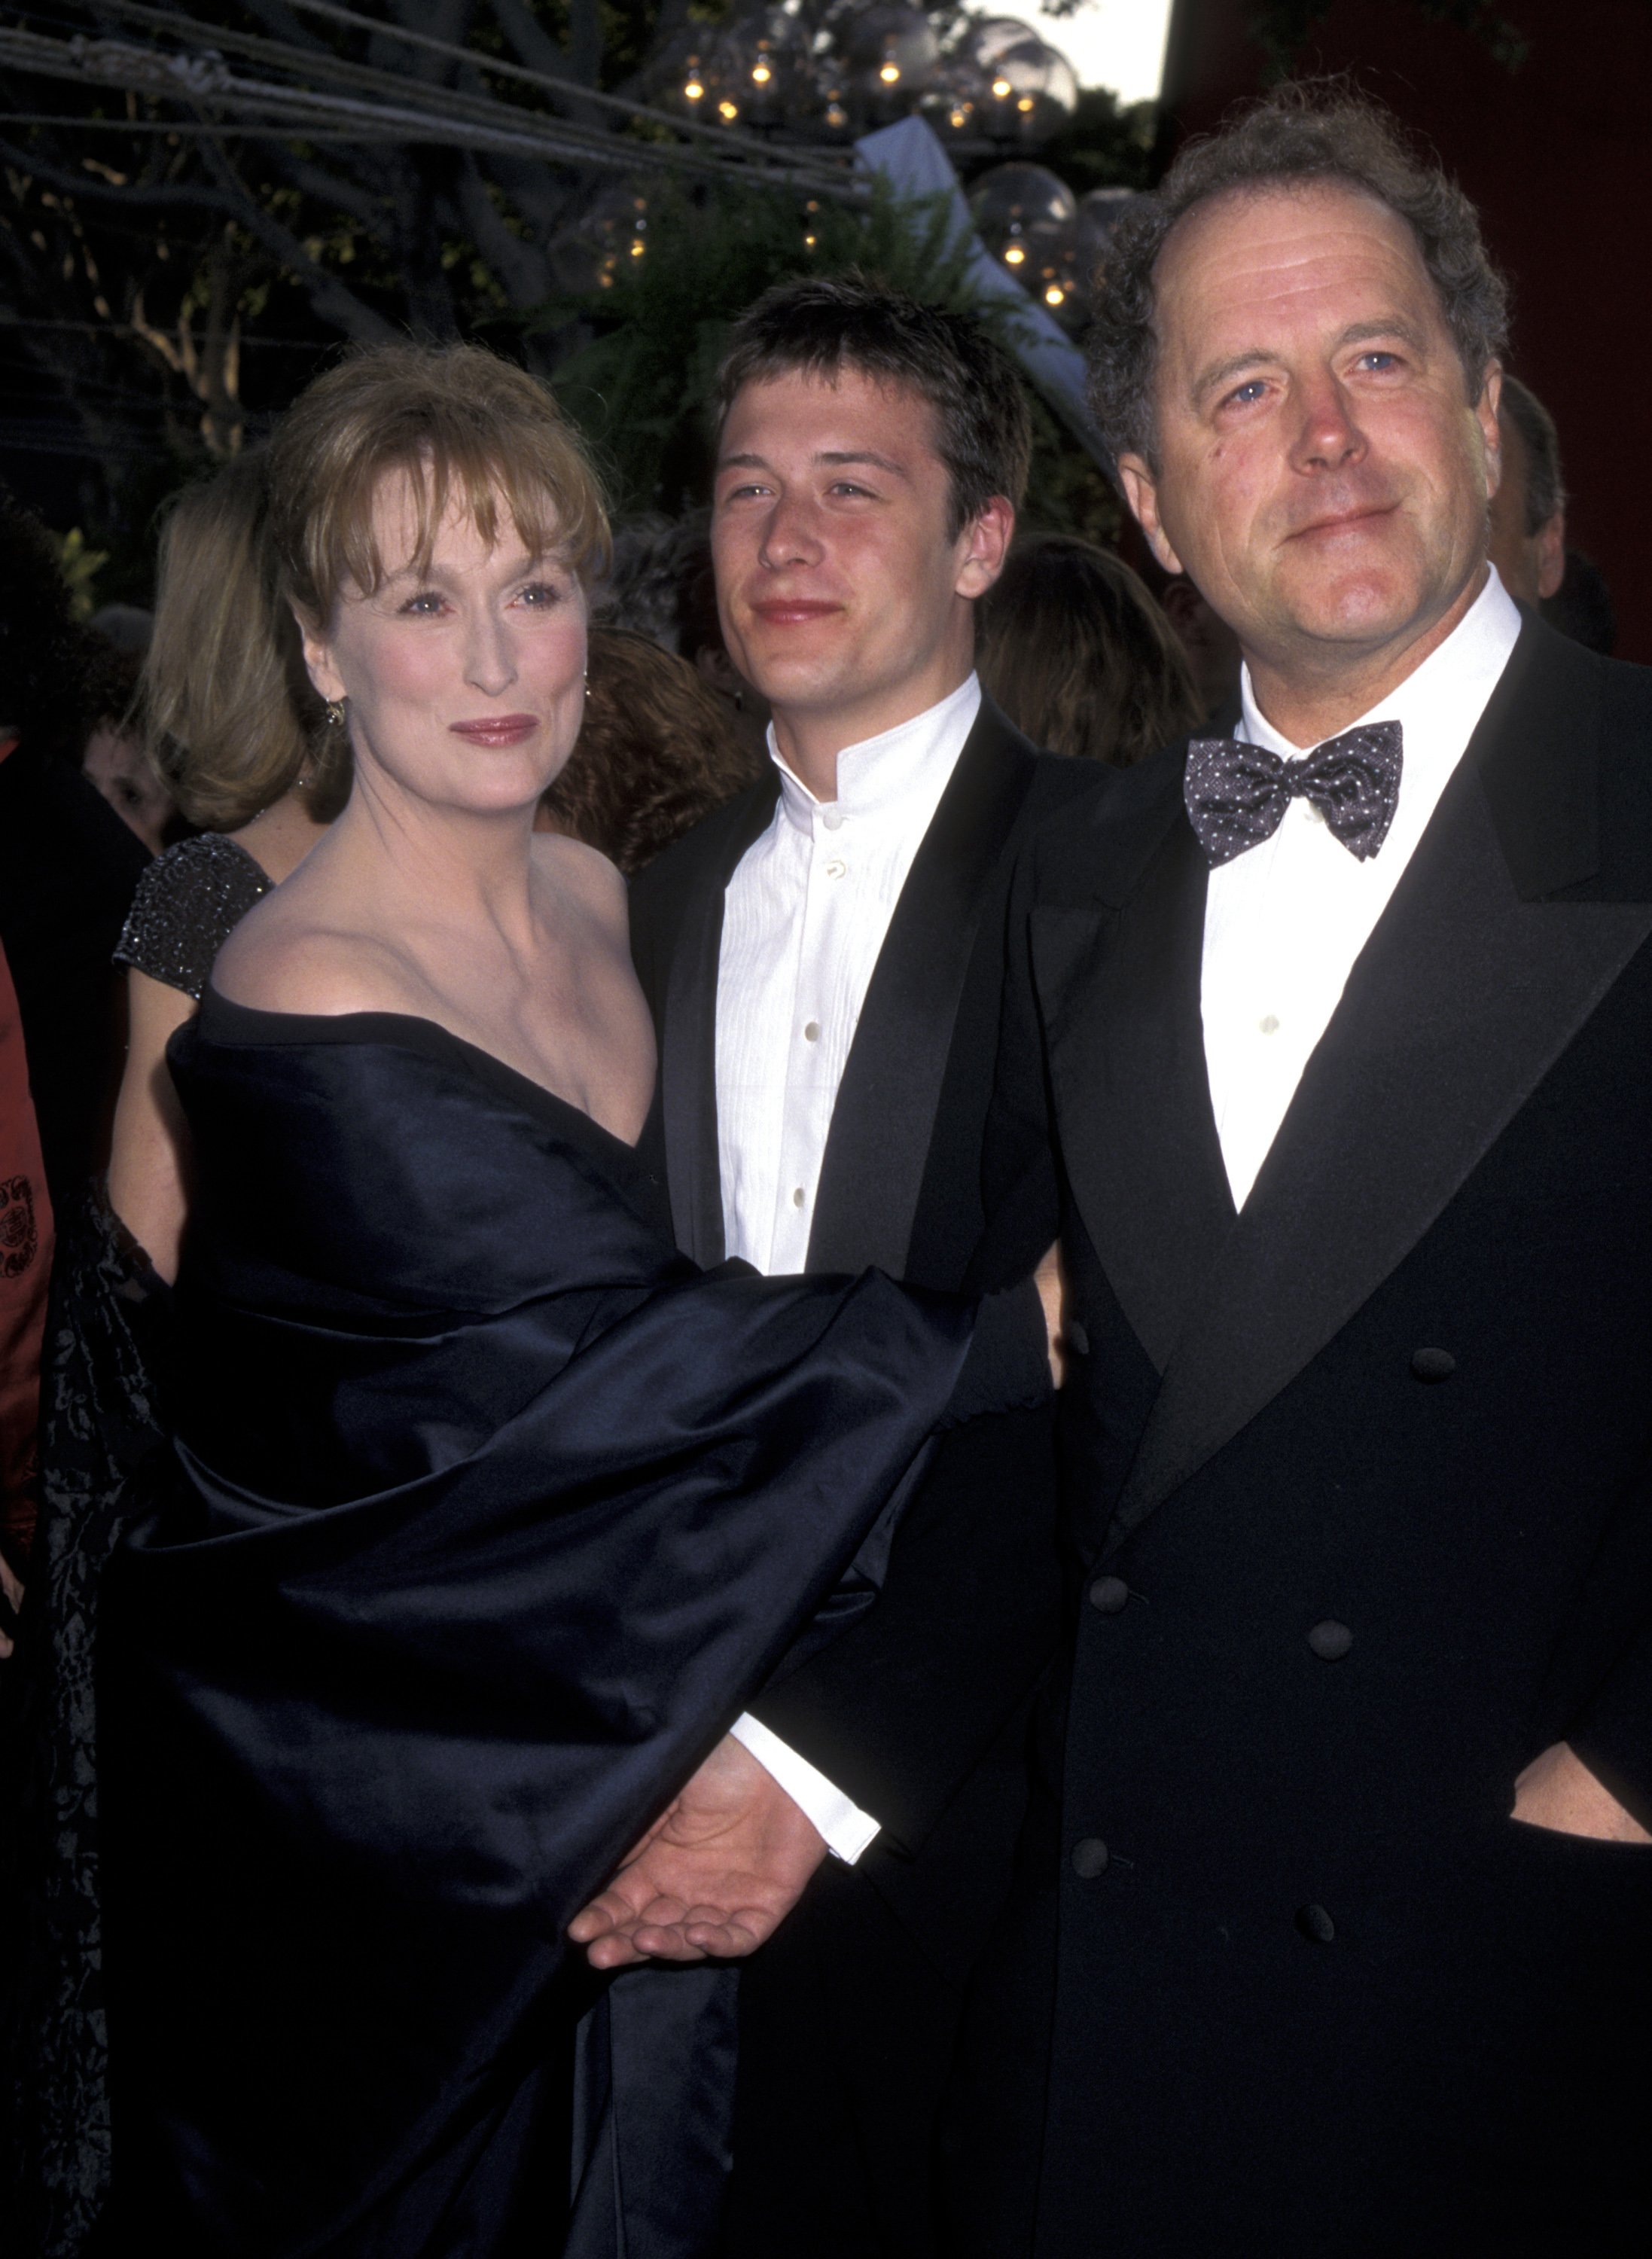 Meryl Streep, Donald Gummer, and\u00a0Henry Gummer at the 68th Annual Academy Awards, on March 25, 1996, in California. | Source: Getty Images